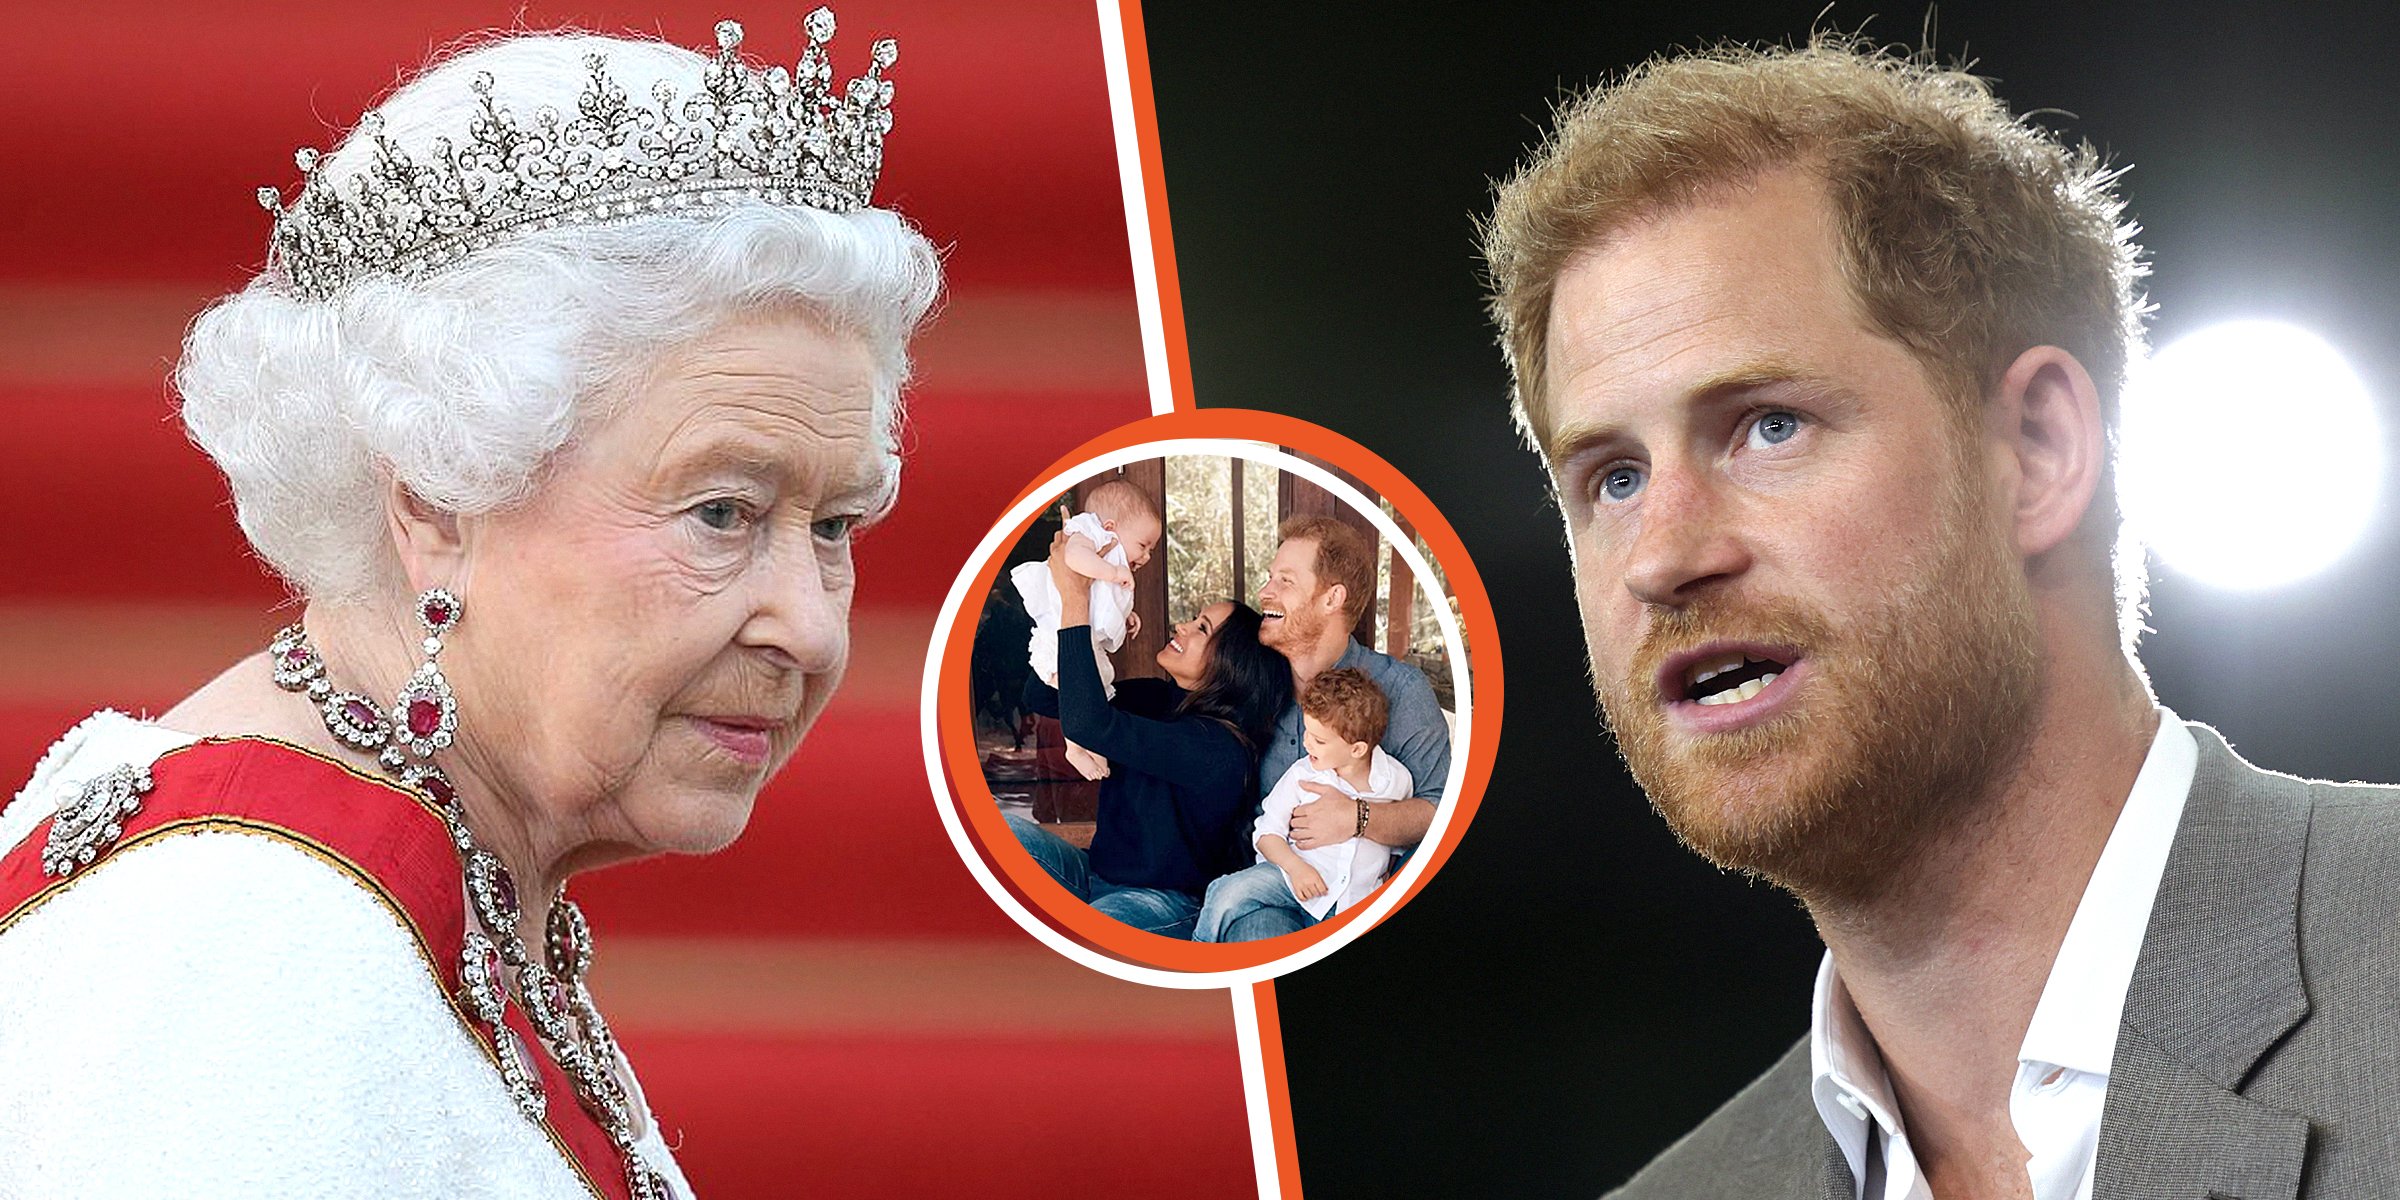 Queen Elizabeth II and Prince Harry. | Meghan Markle, Prince Harry, Lilibert and Archie. | Source: Instagram.com/alexilubomirski | Getty images